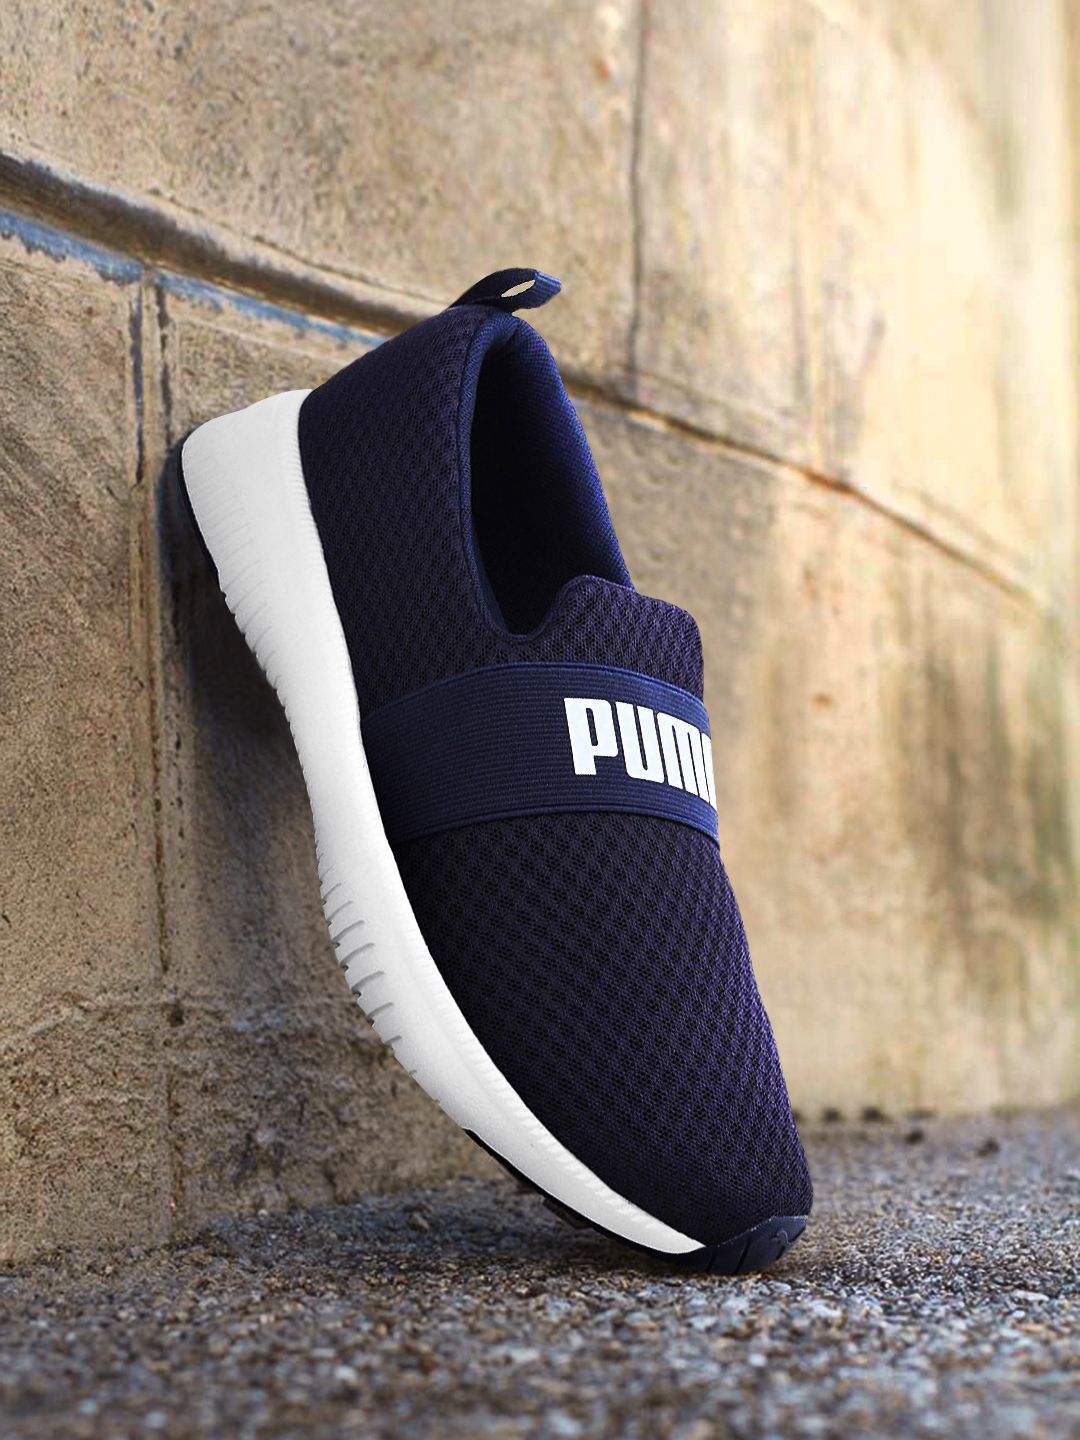 Puma Unisex Navy Blue Solid Textile Running Shoes Price in India